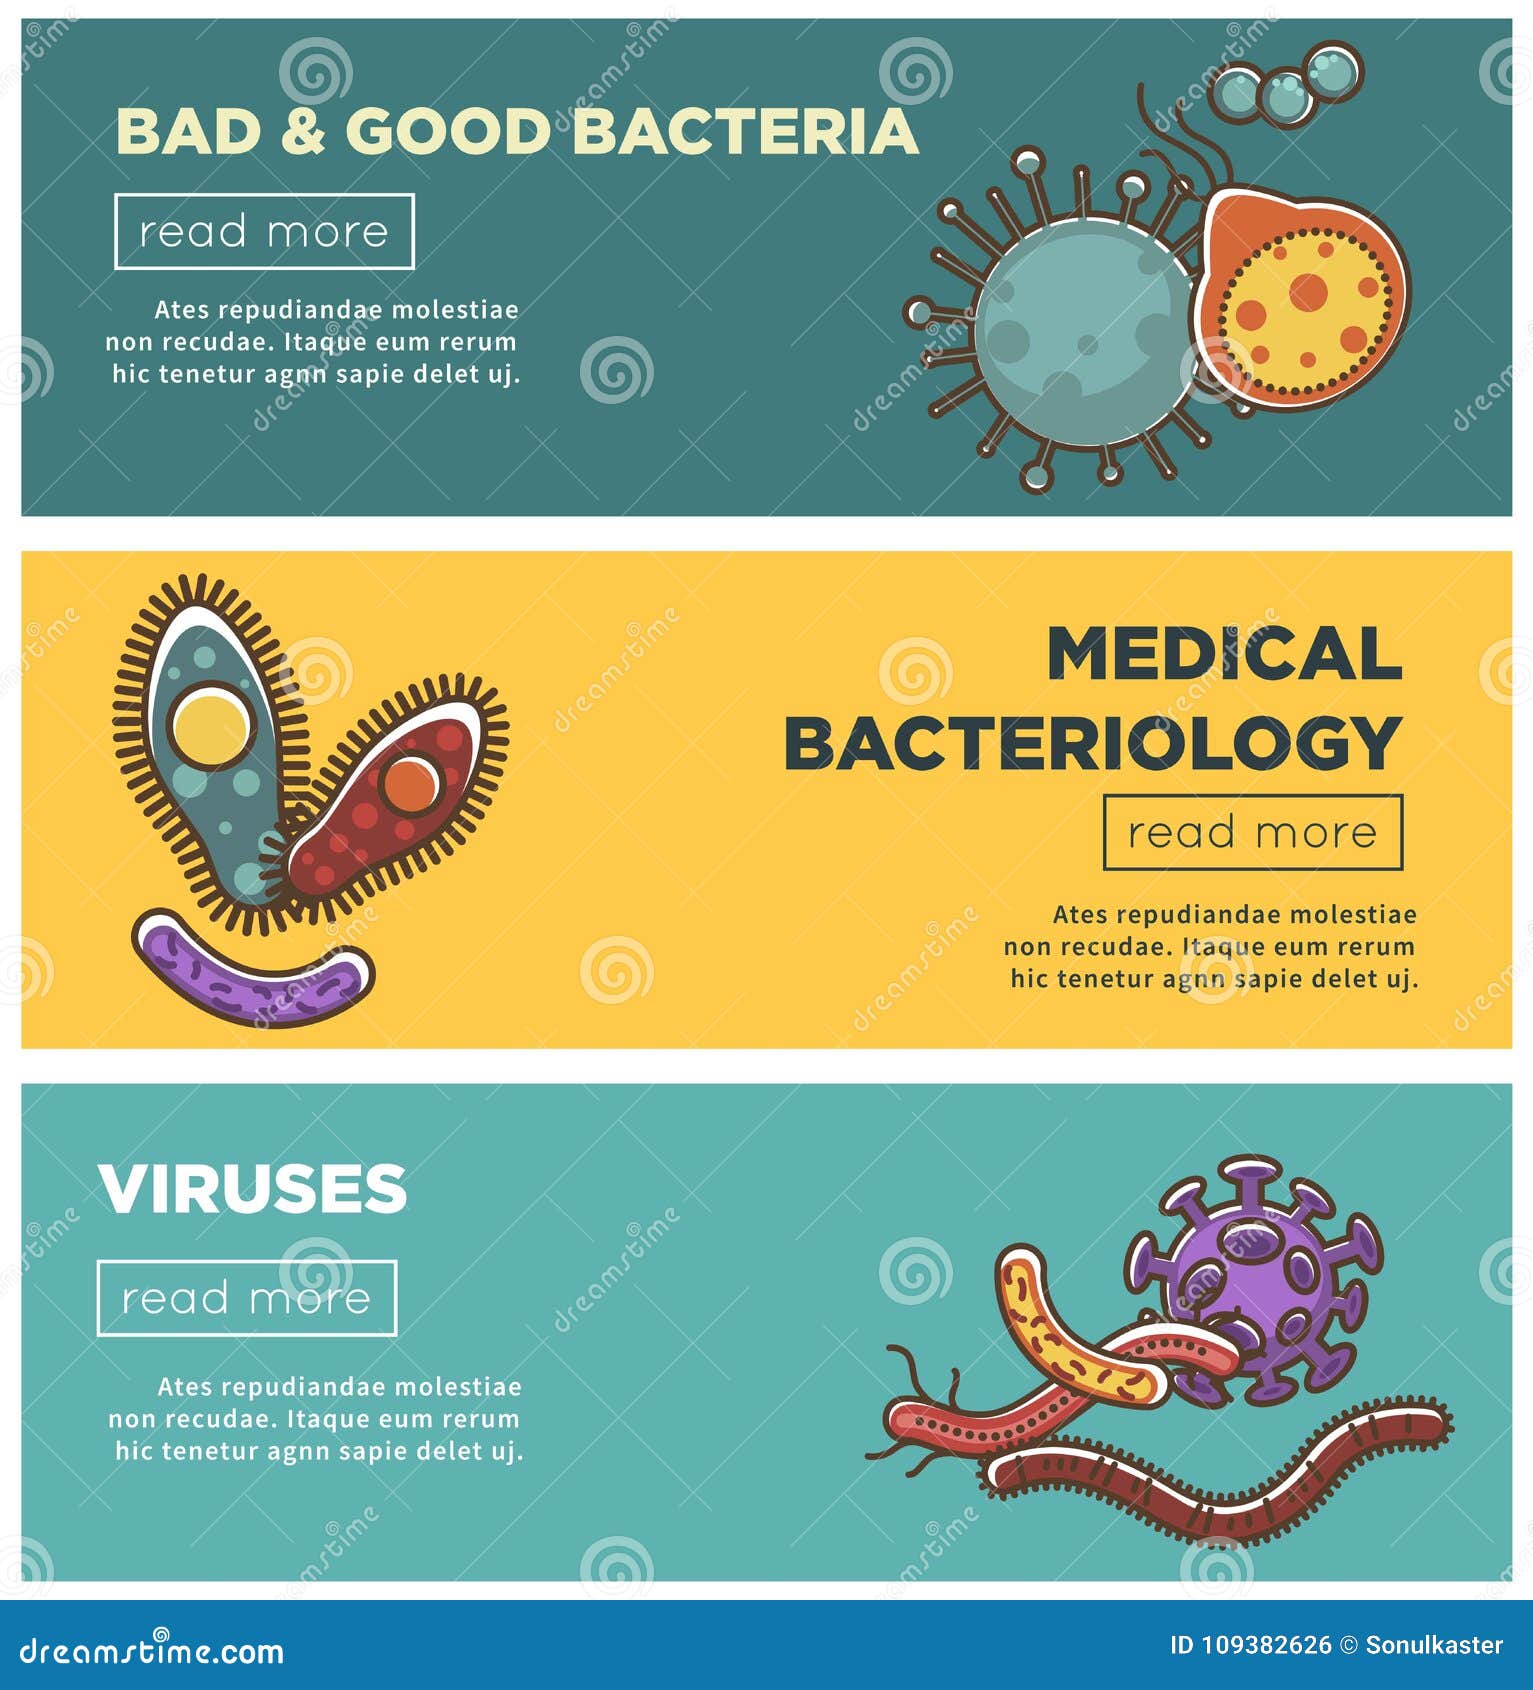 bad and good bacteria, harmful viruses and medical bacteriology